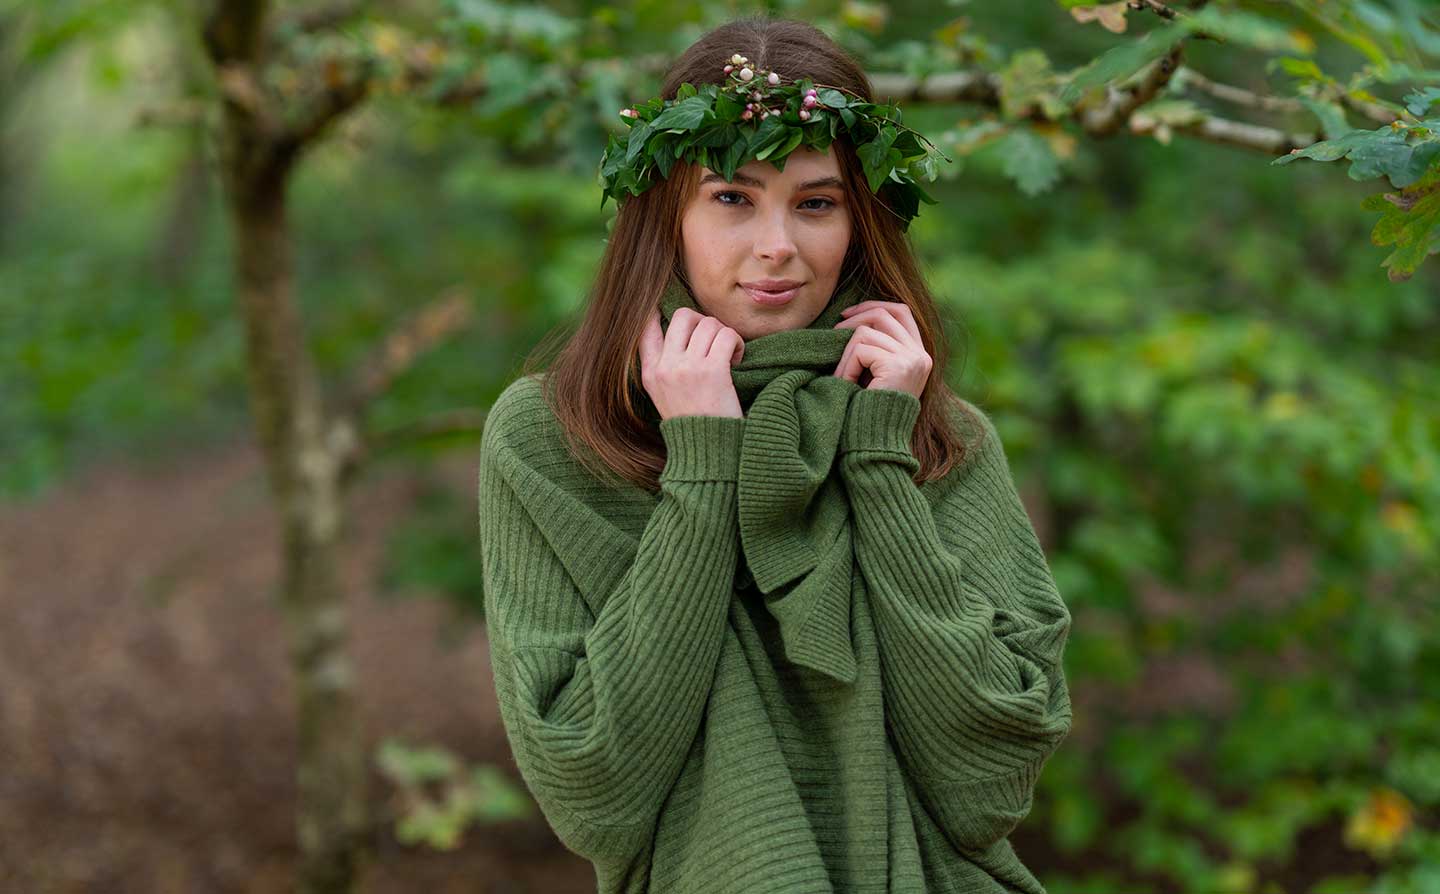 abigail rib cashmere jumper worn with classic cashmere scarf in the forest